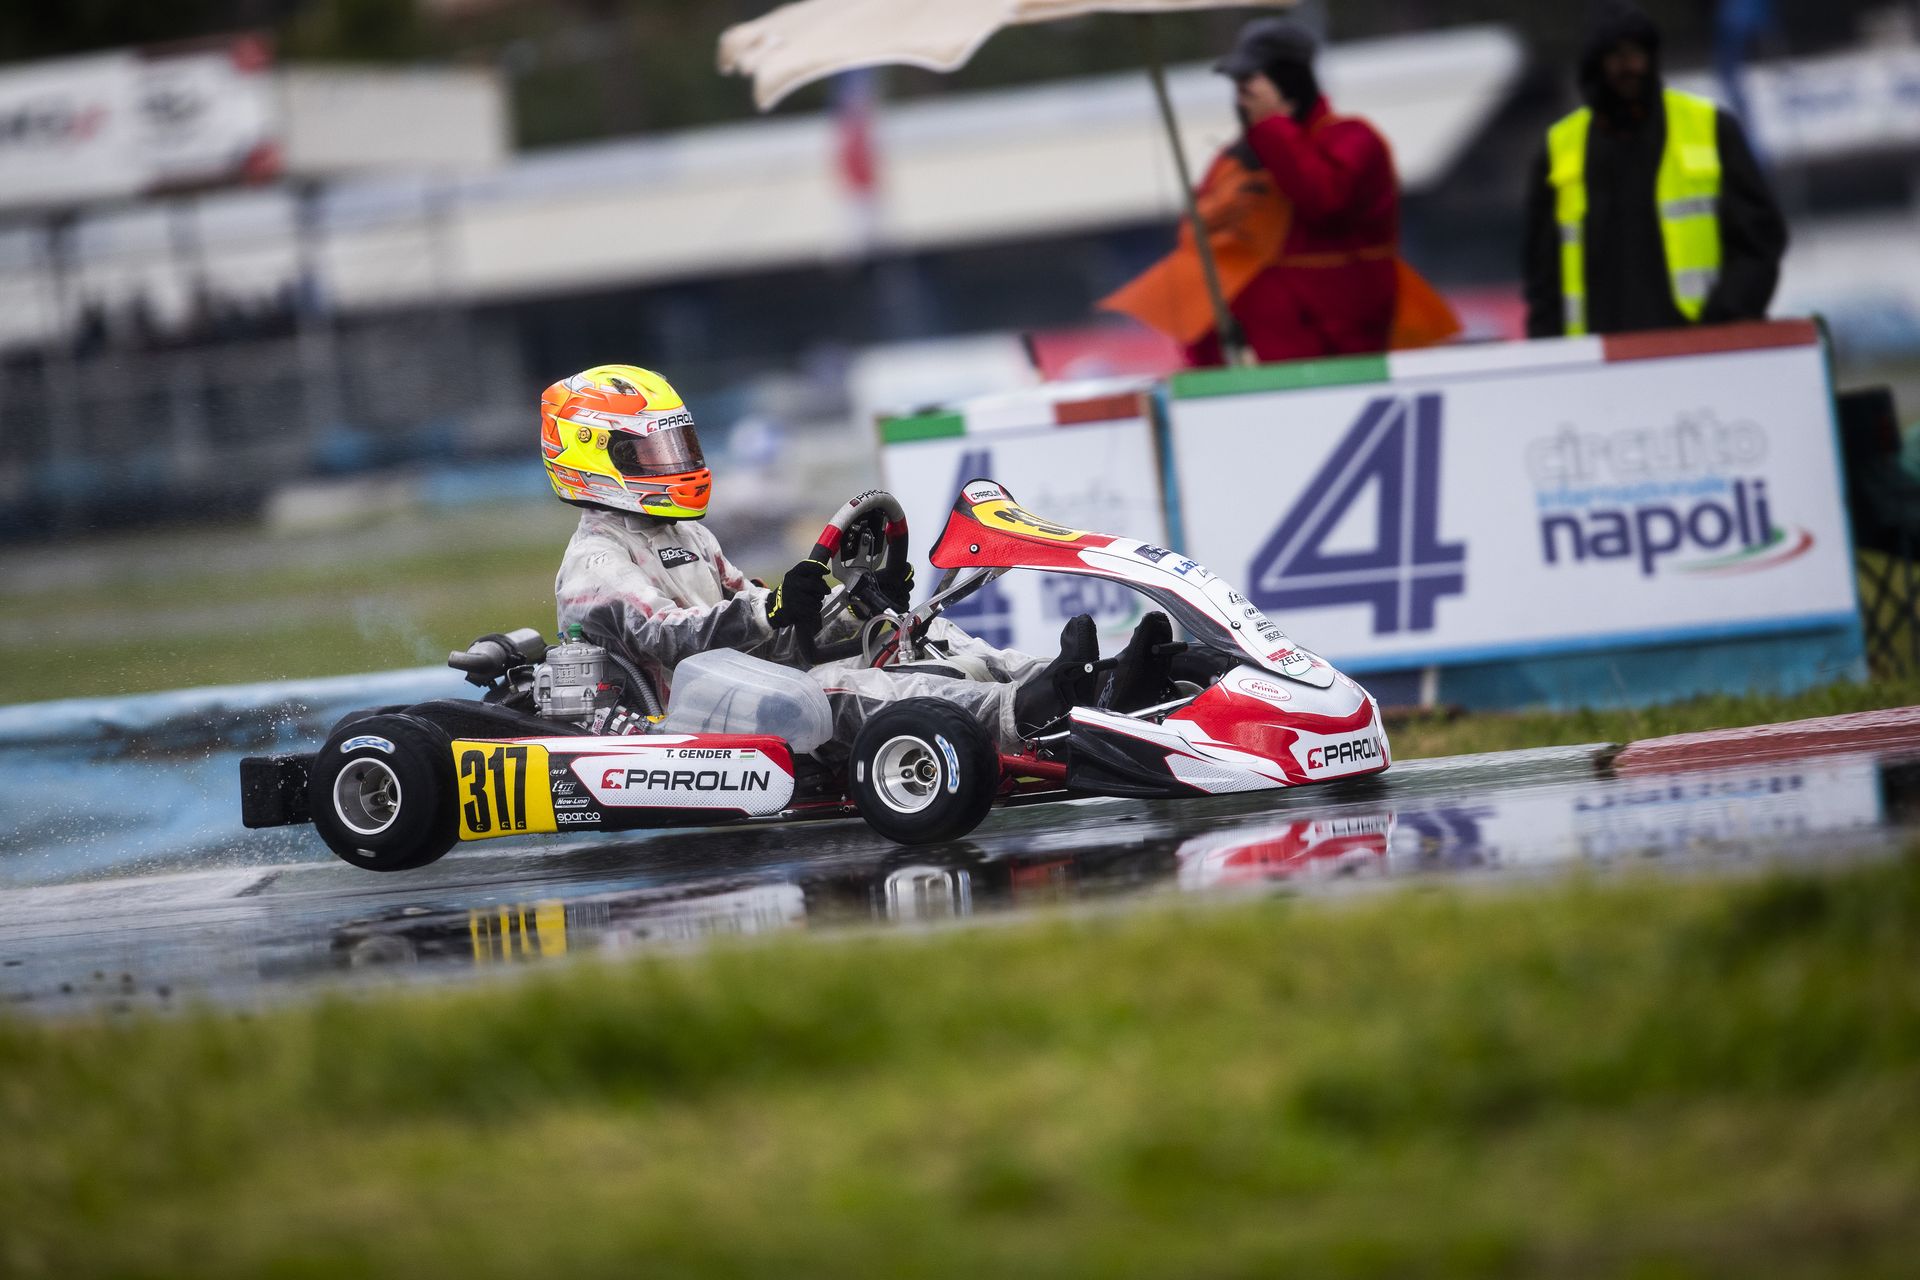 Tamas Gender Junior competes in the wet race